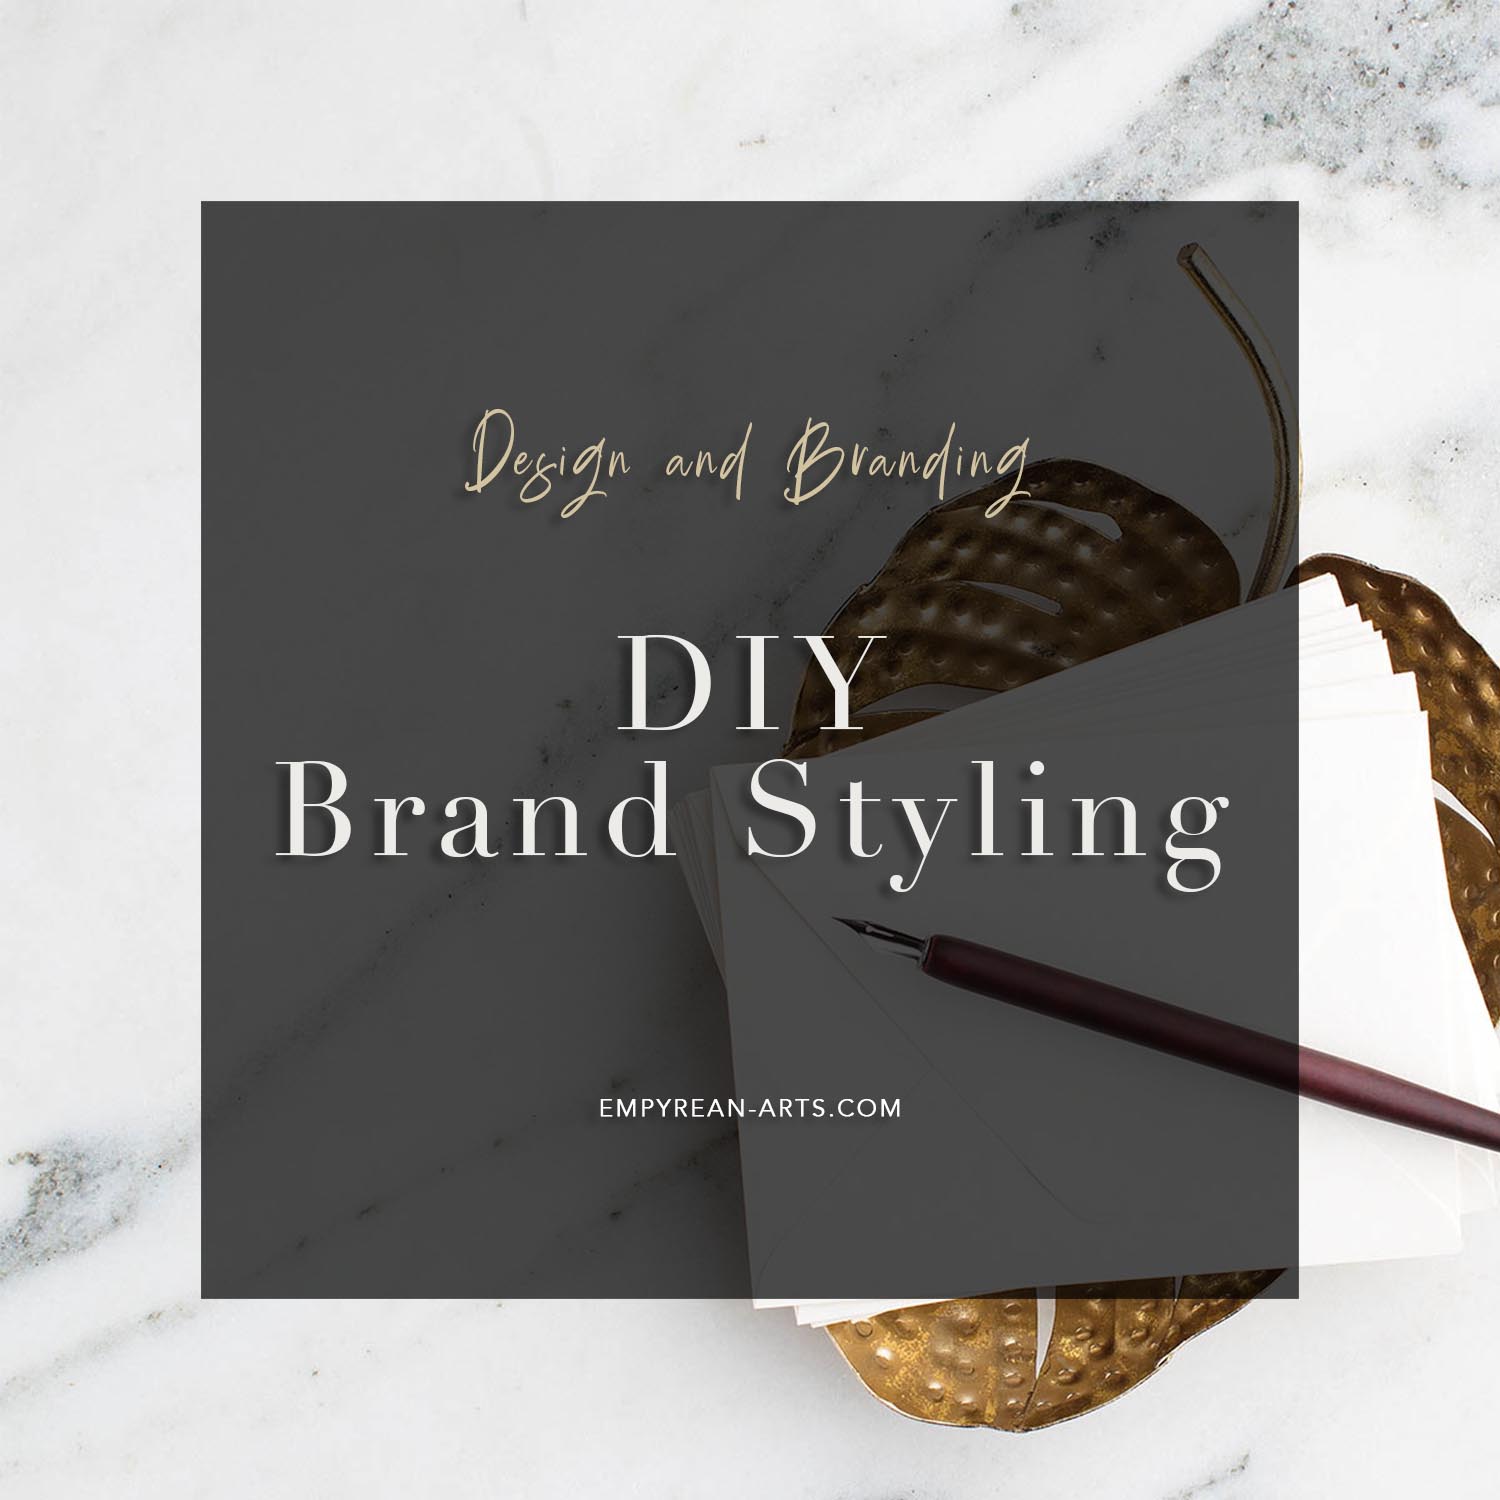 DIY-Brand-Styling-Branding-101-Empyrean-Arts-Branding-Style-Guide-Graphic-Design-Logo-Colours-Fonts